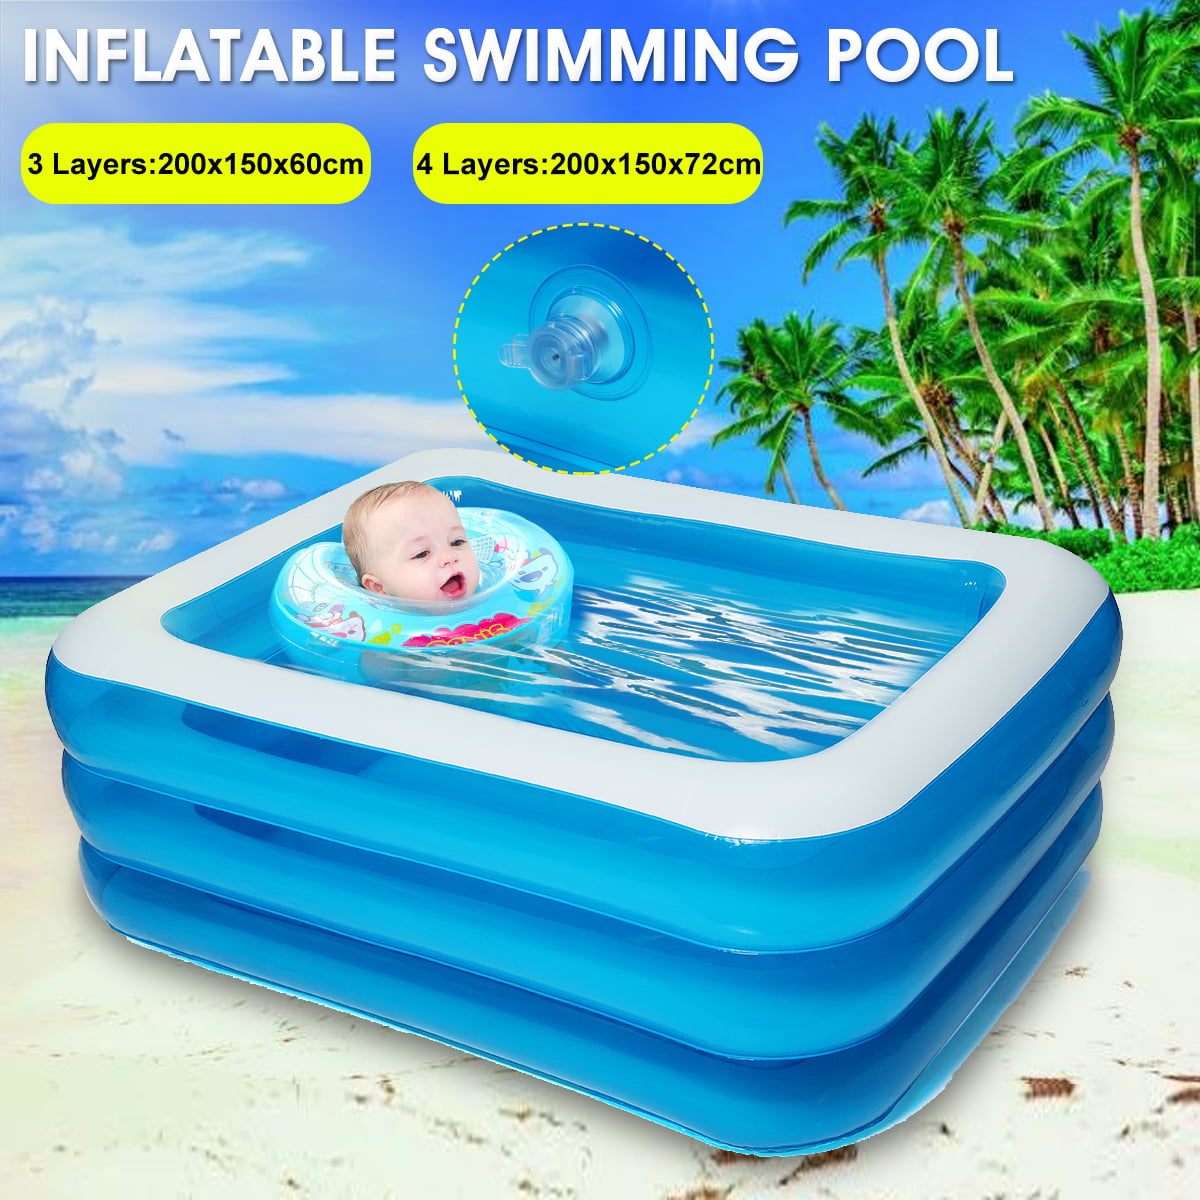 Inflatable Swimming Pool, Rectangular Large Pool for